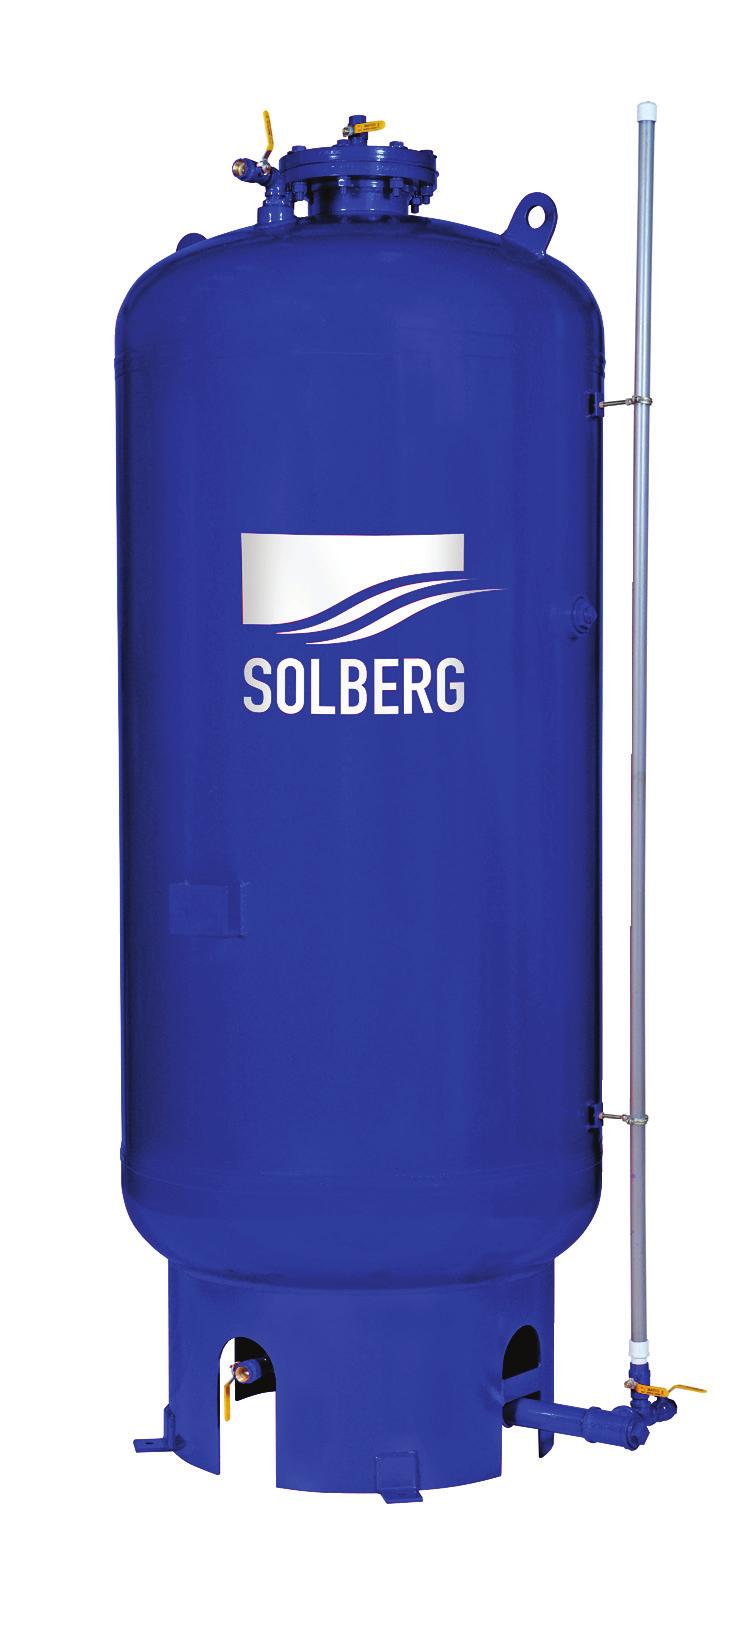 TANKS HORIZONTAL & VERTICAL hardware Features UL Listed with Solberg foam concentrates FM Approved with RE-HEALING RF3, 3% and Arctic 3x3% ATC Foam Concentrates Accurate concentrate proportioning